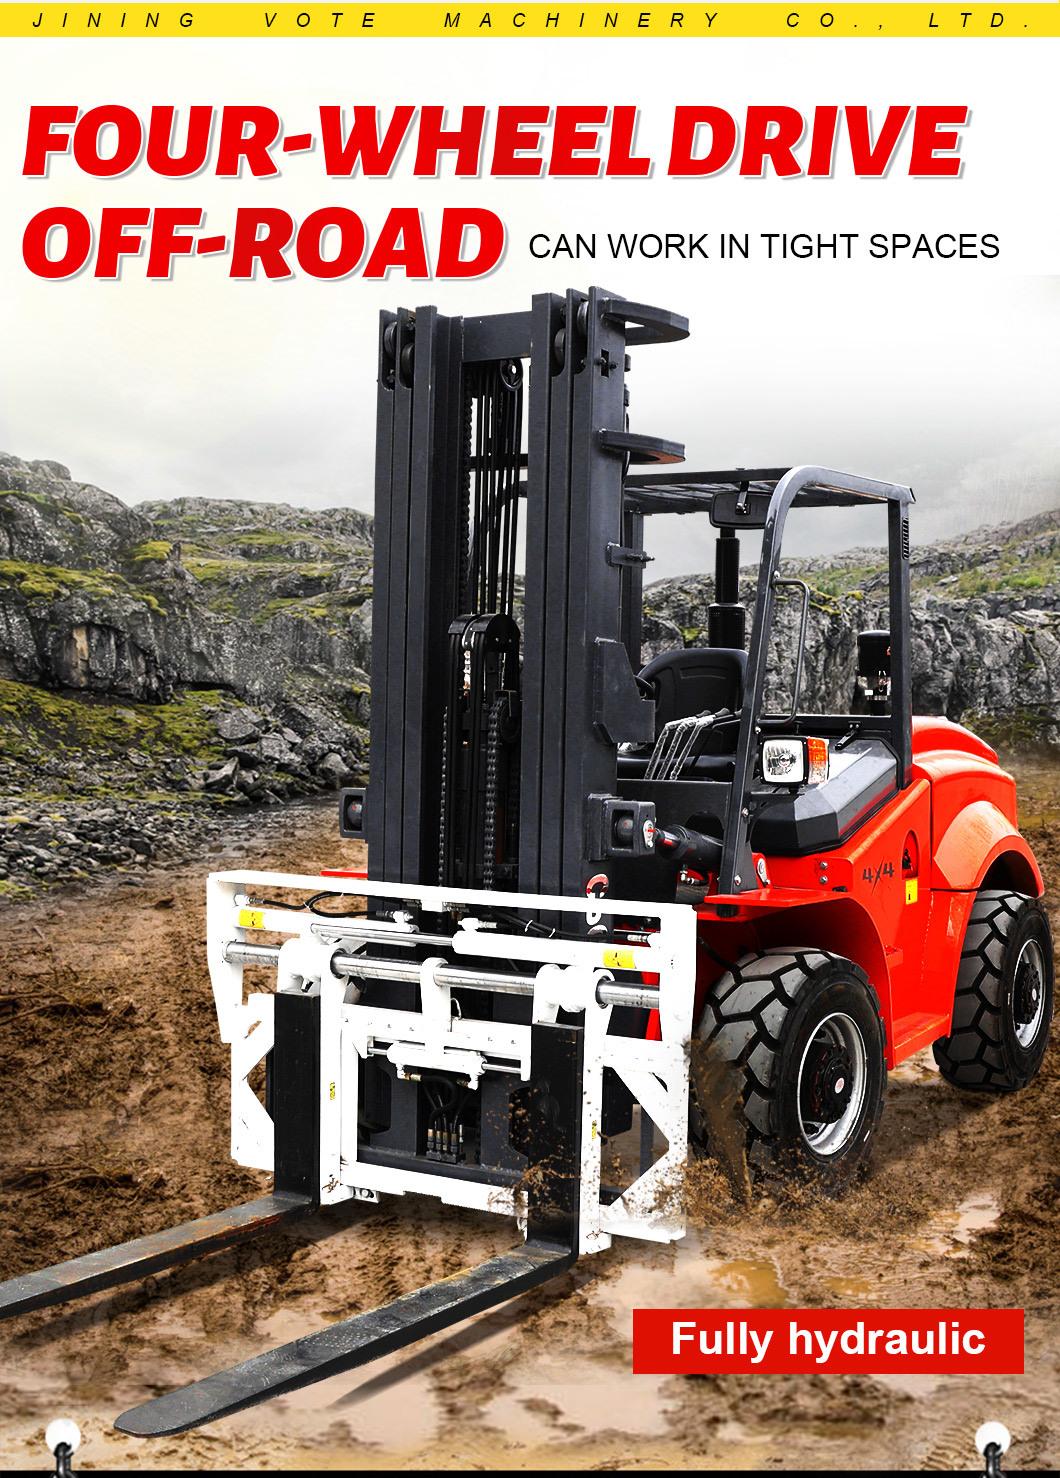 Full-Free 4WD Rough Terrain Diesel Forklift 3 to 5 Ton Small Forklifts Manufacturer